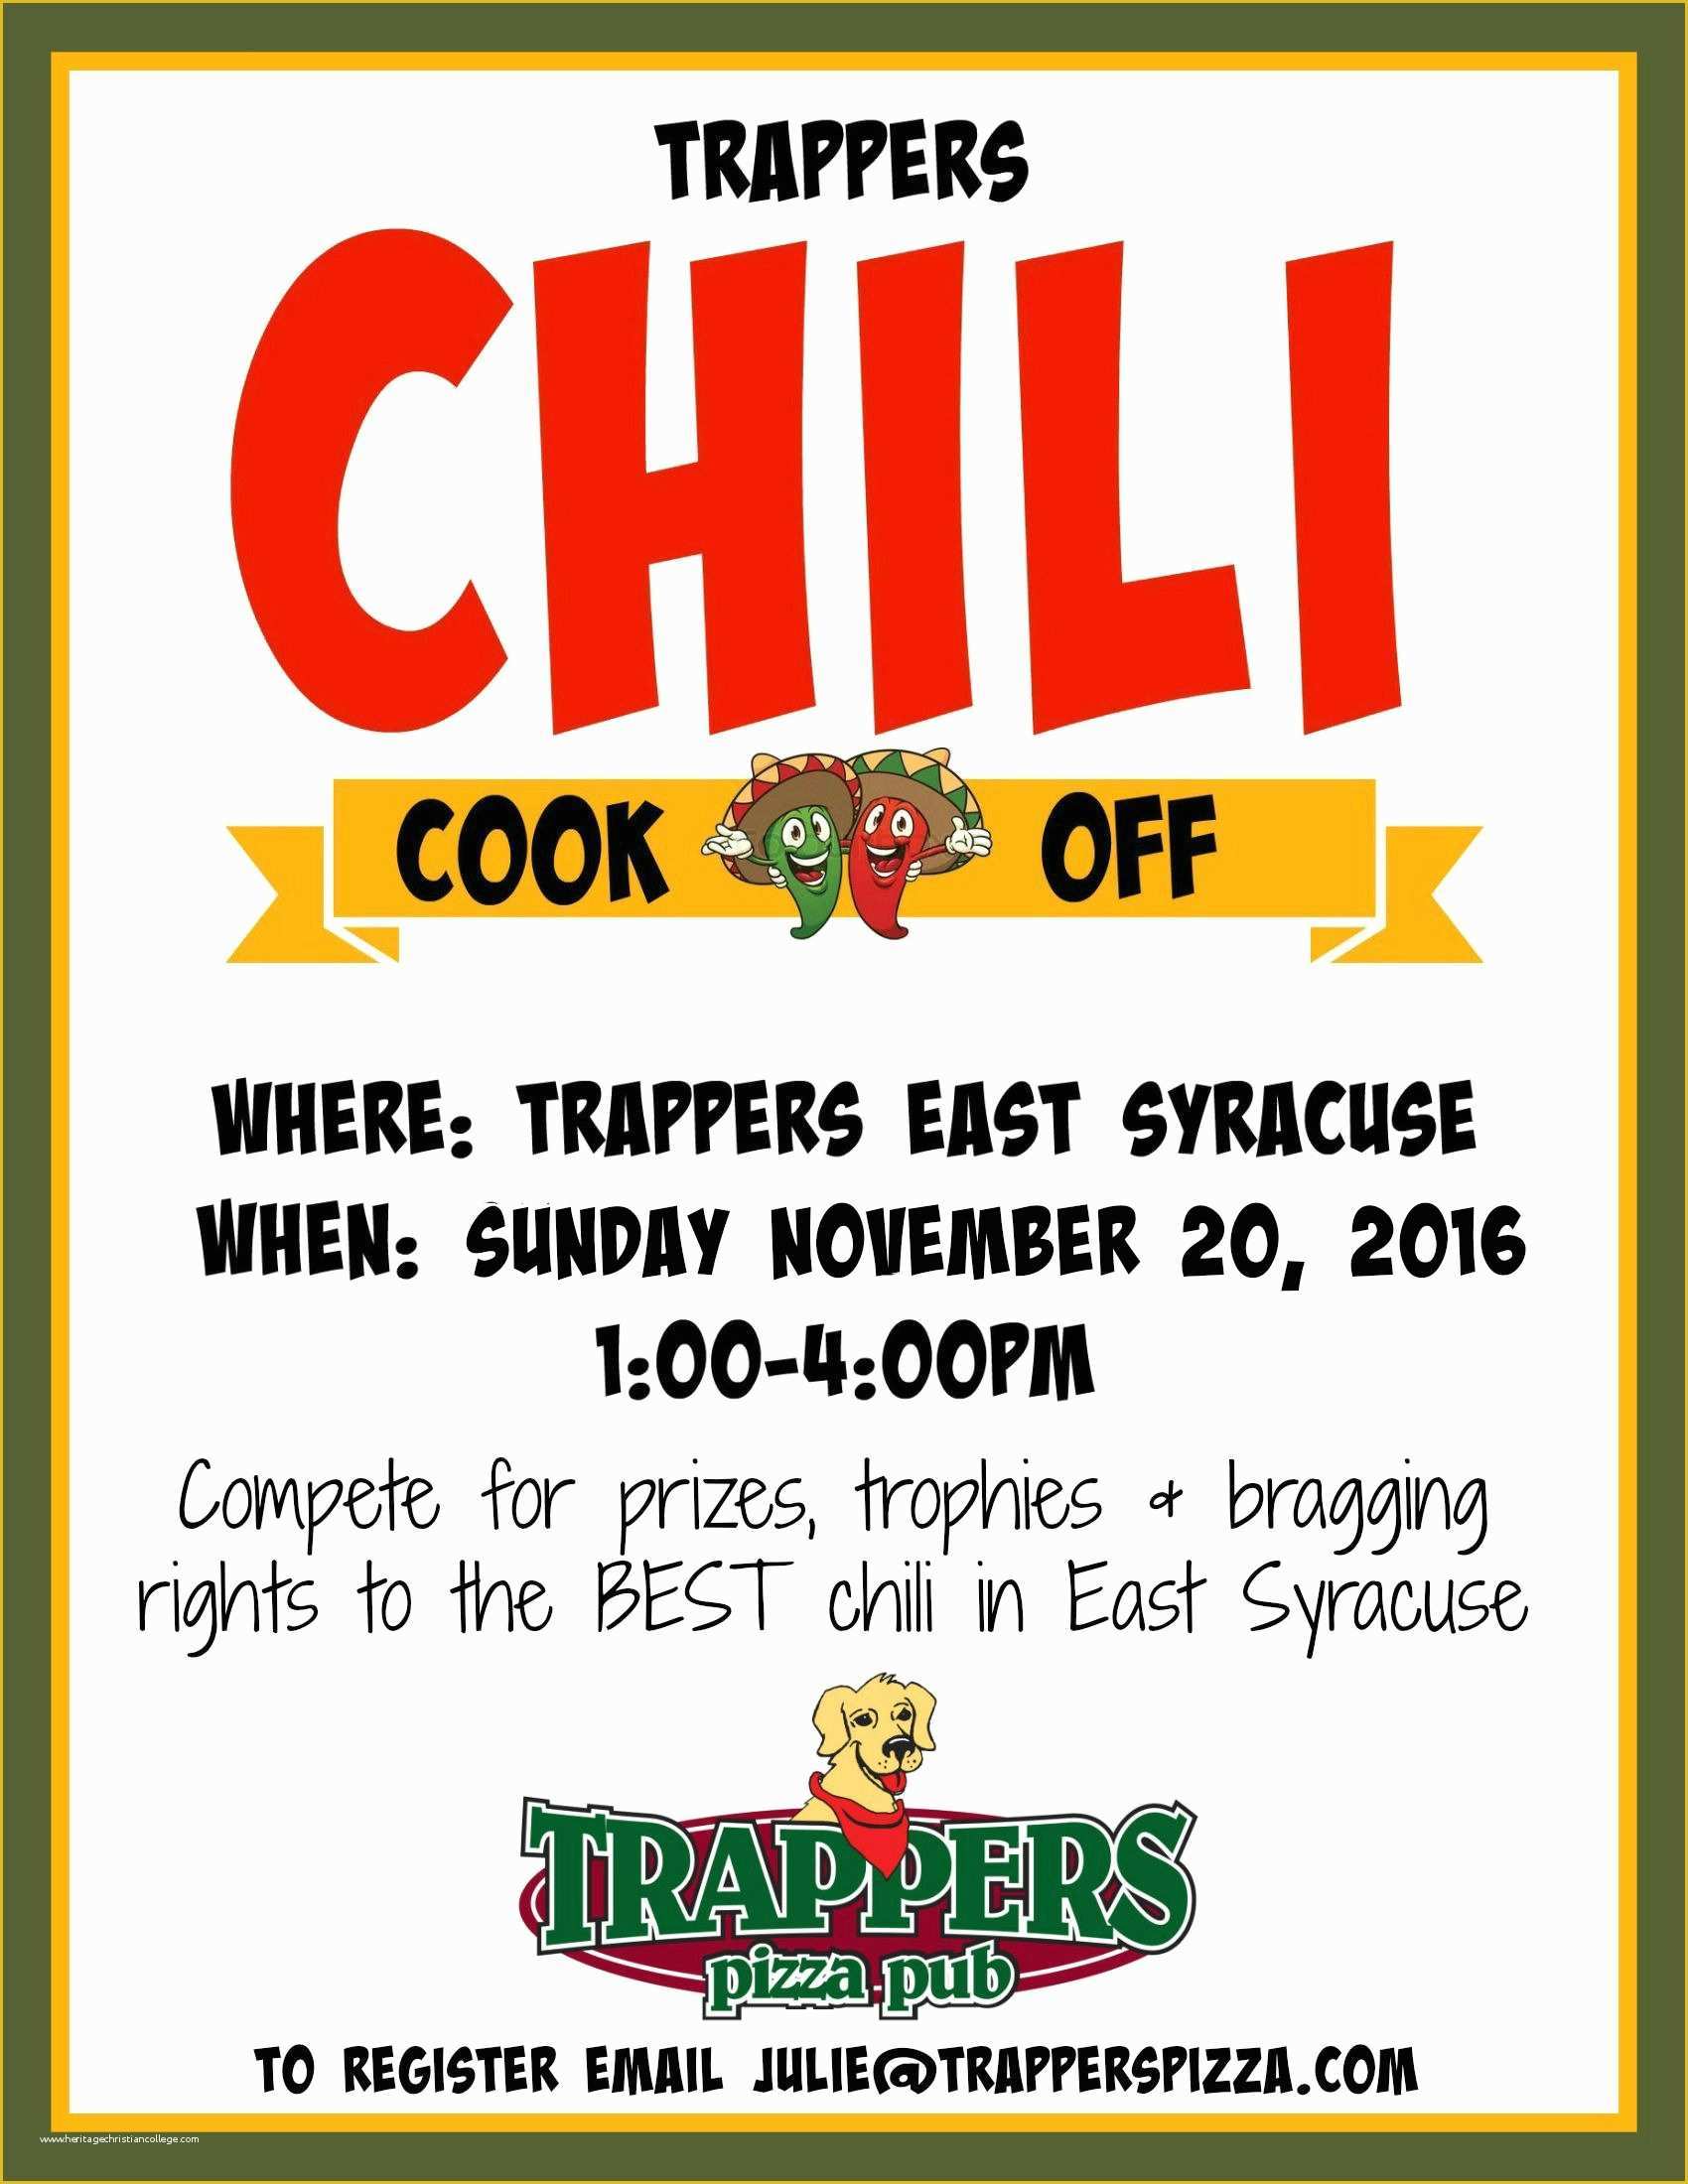 Chili Cook Off Flyer Template Free Of Trappers 2nd Annual Chili Cook Off Trappers Pizza Pub